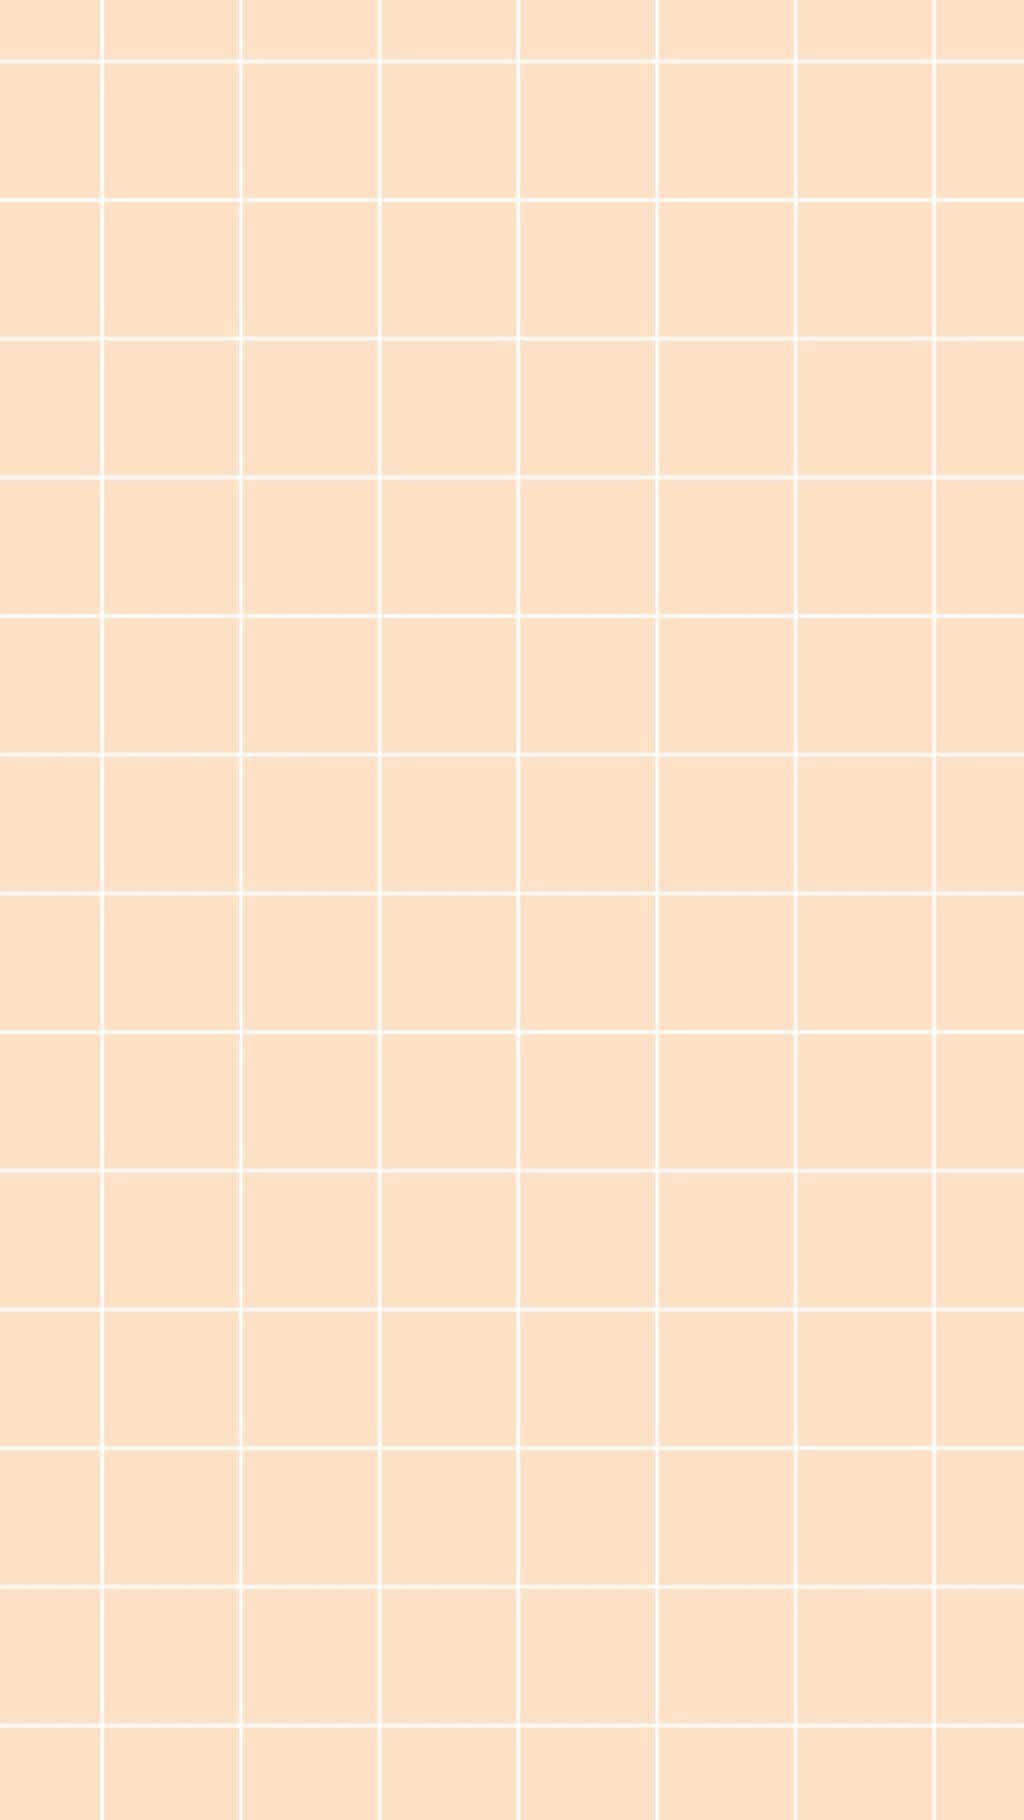 A beige tile pattern with white squares - Peach